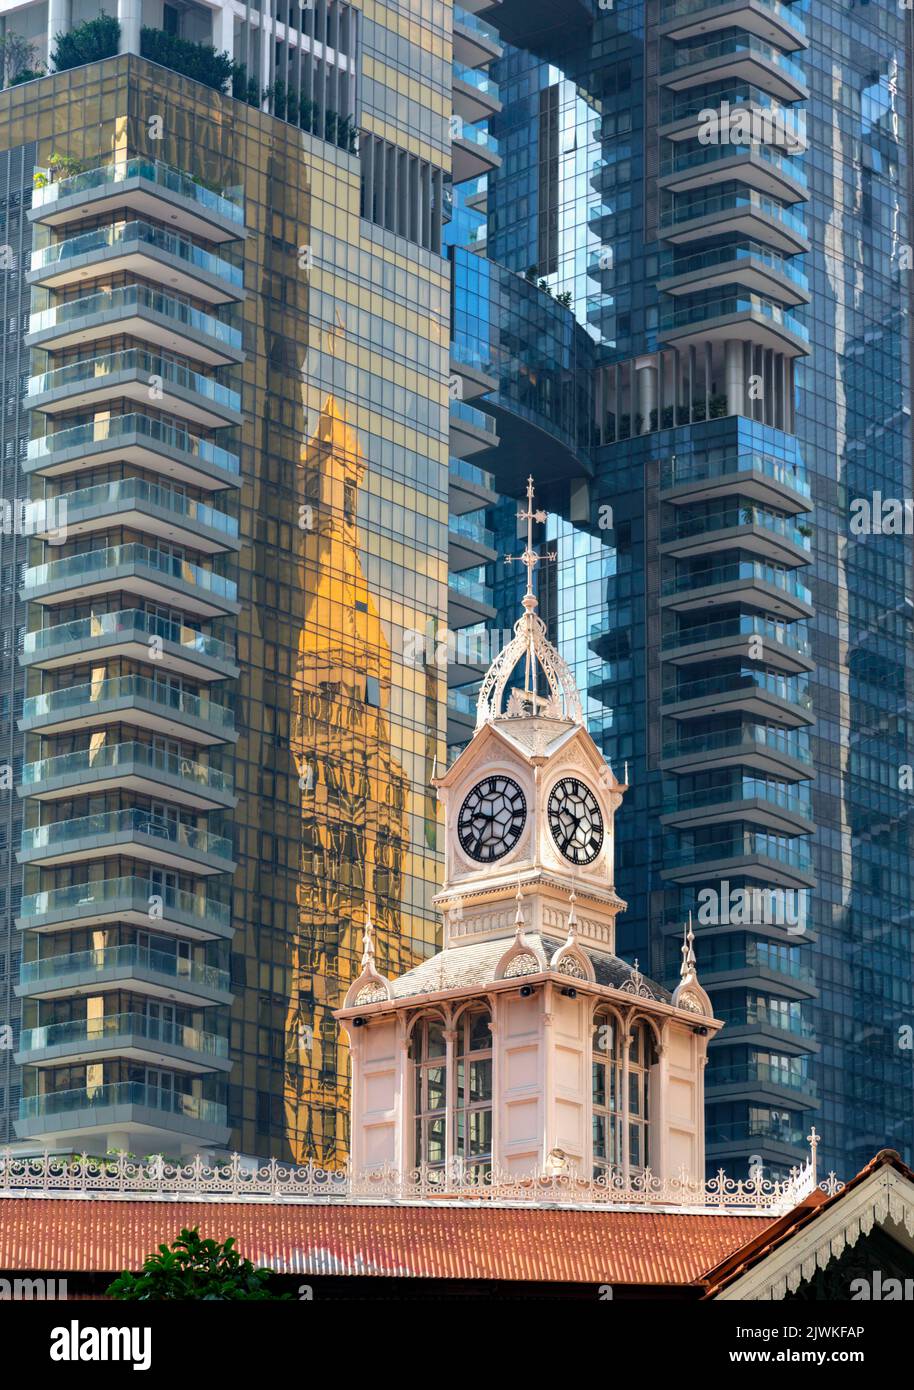 Clock tower of the 19th century Lau Pa Sat, also known as Telok Ayer Market against towering modern buildings in Robinson Road, Republic of Singapore. Stock Photo